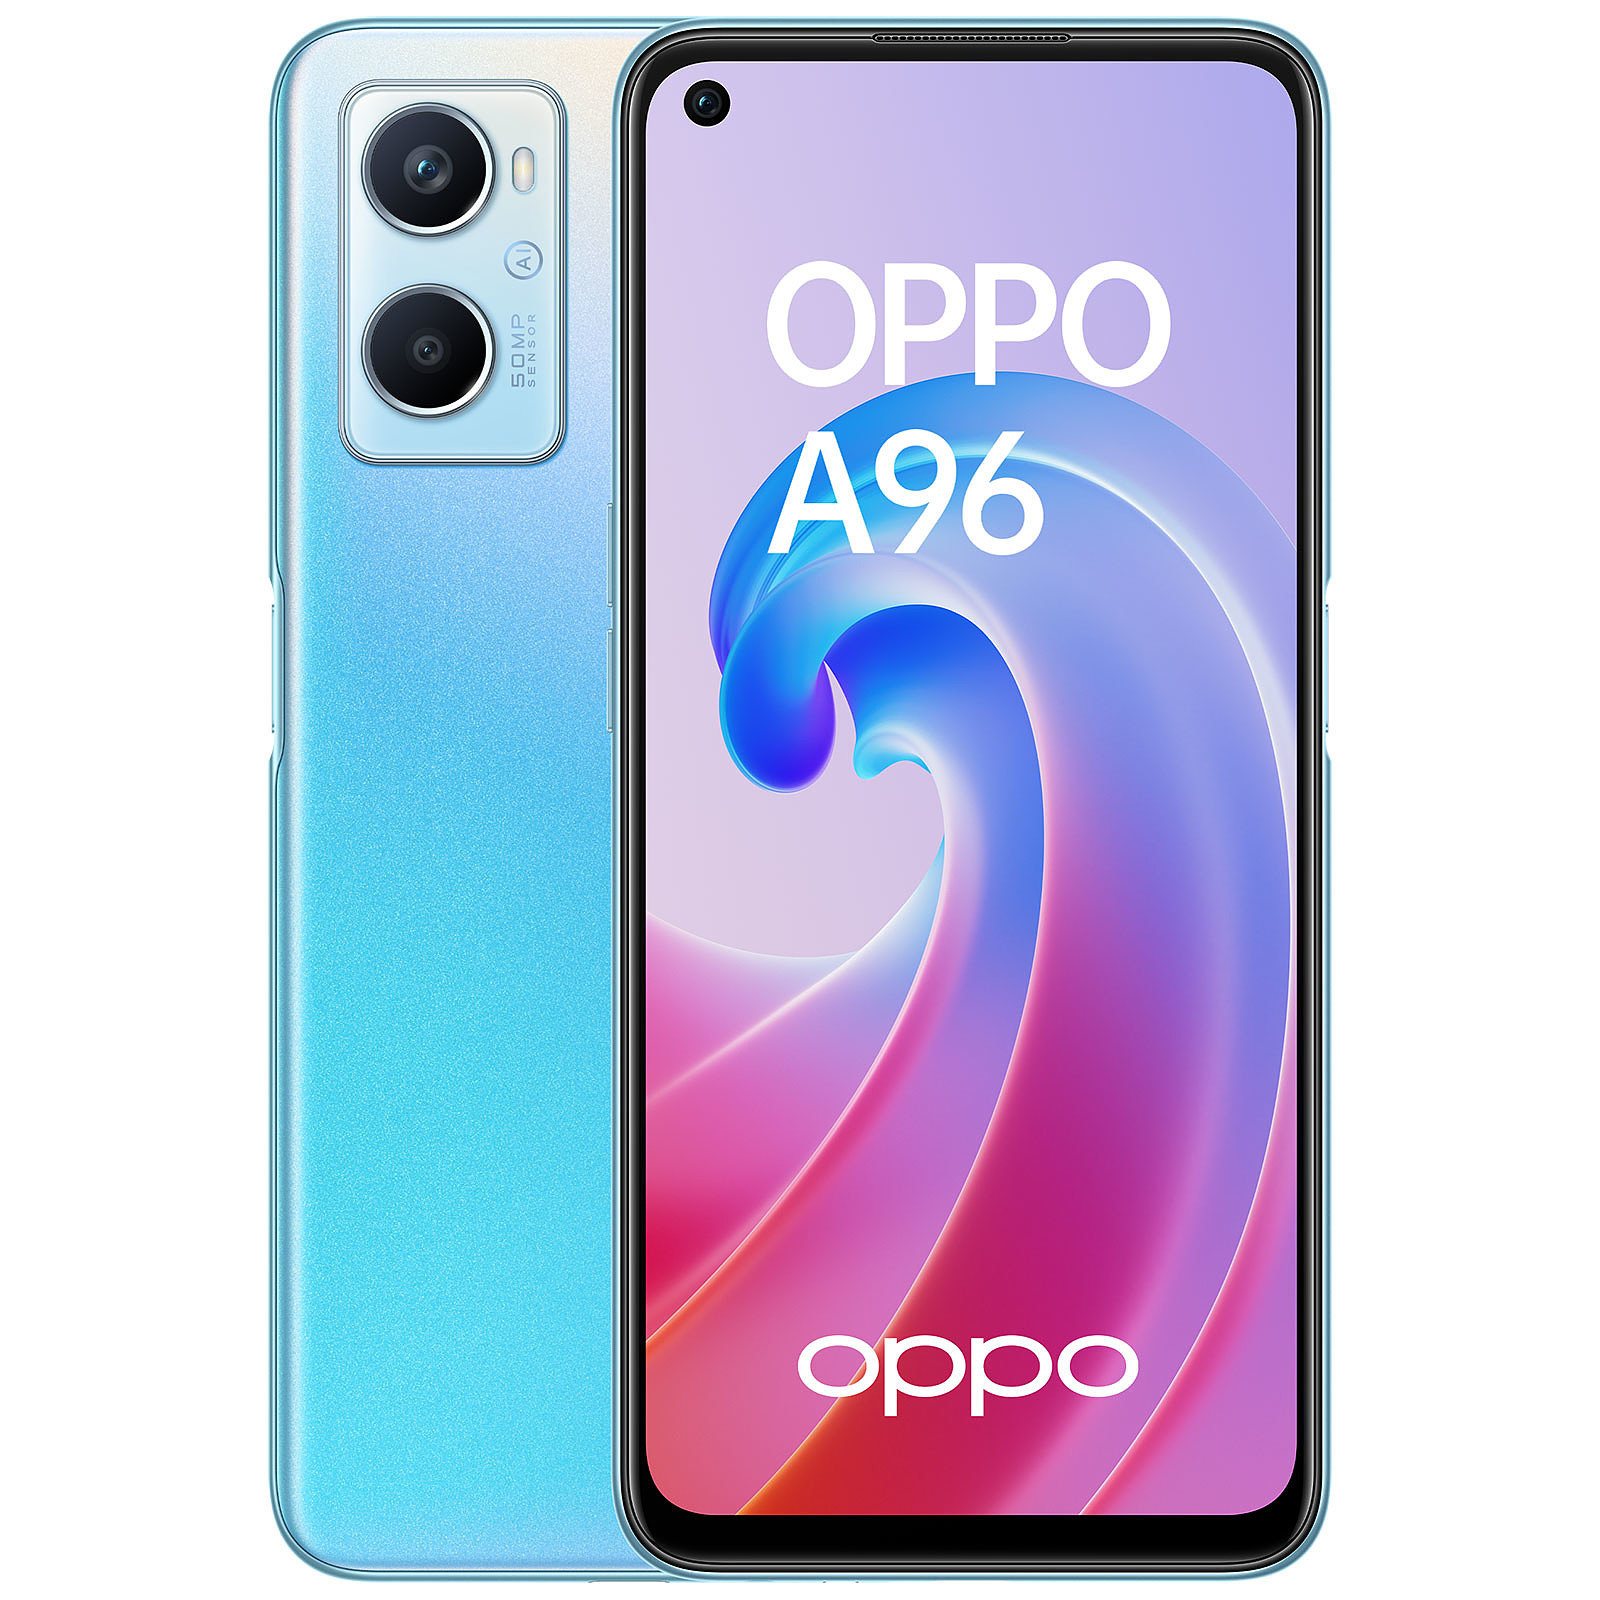 OPPO A96 Bleu Crepuscule - Mobile & smartphone OPPO